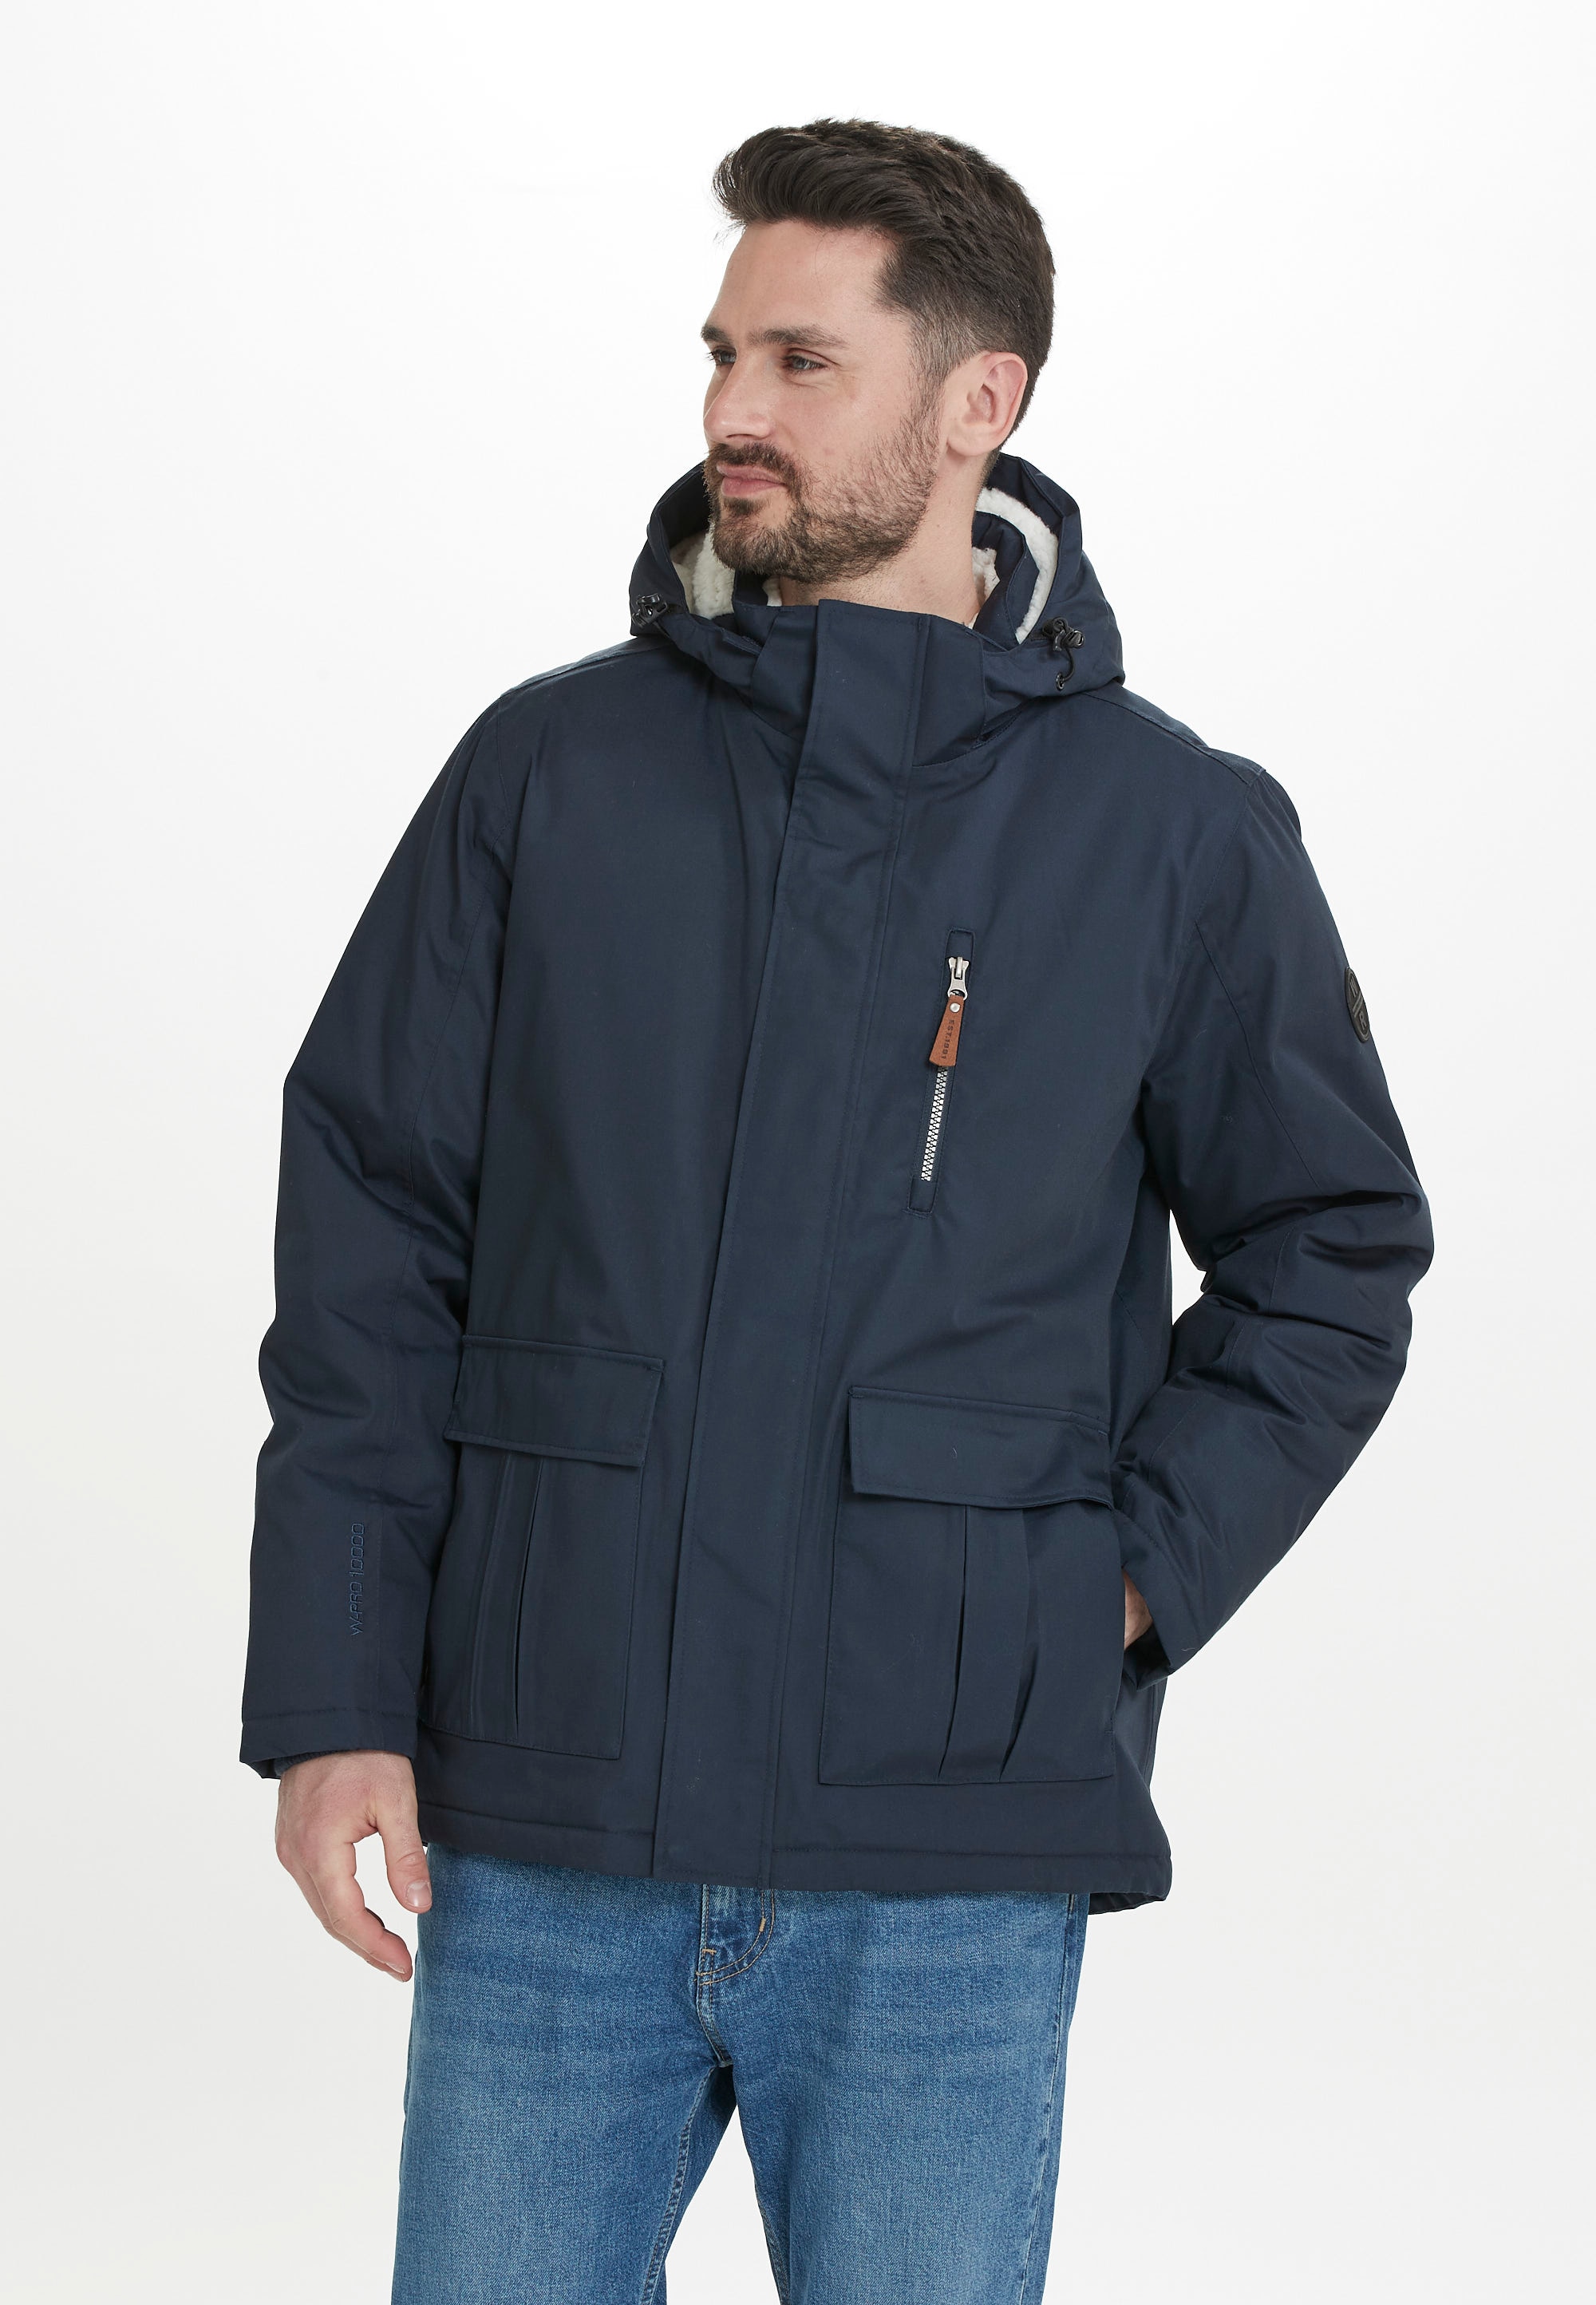 WEATHER REPORT Outdoorjacke »Chase« su 10.000 mm vand...